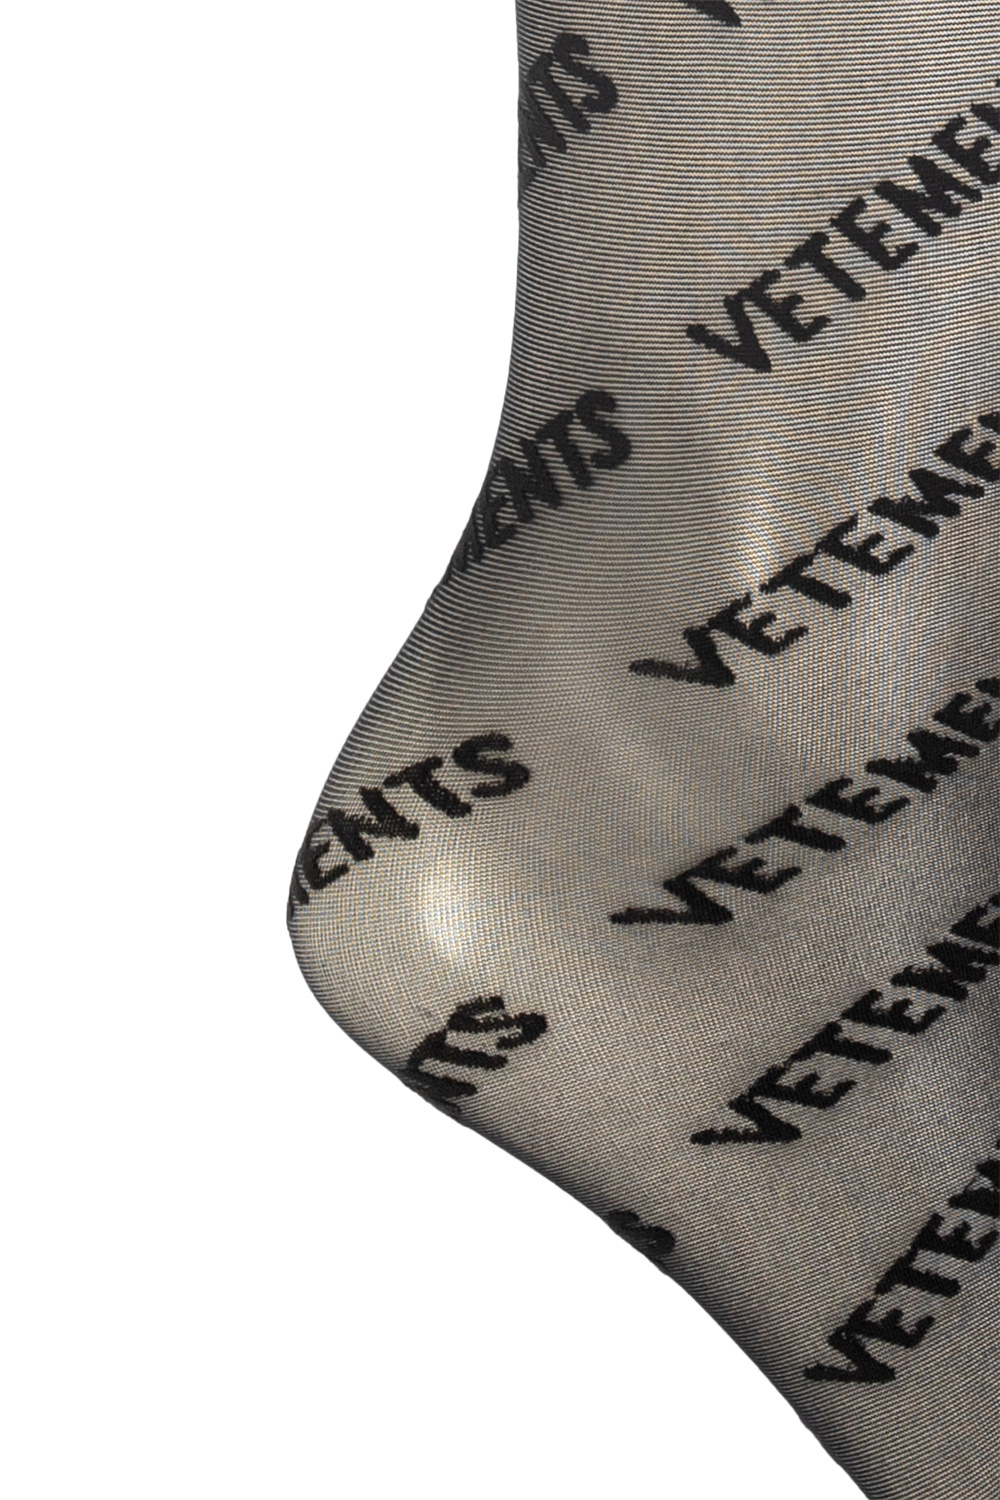 VETEMENTS Tights with logo, IetpShops